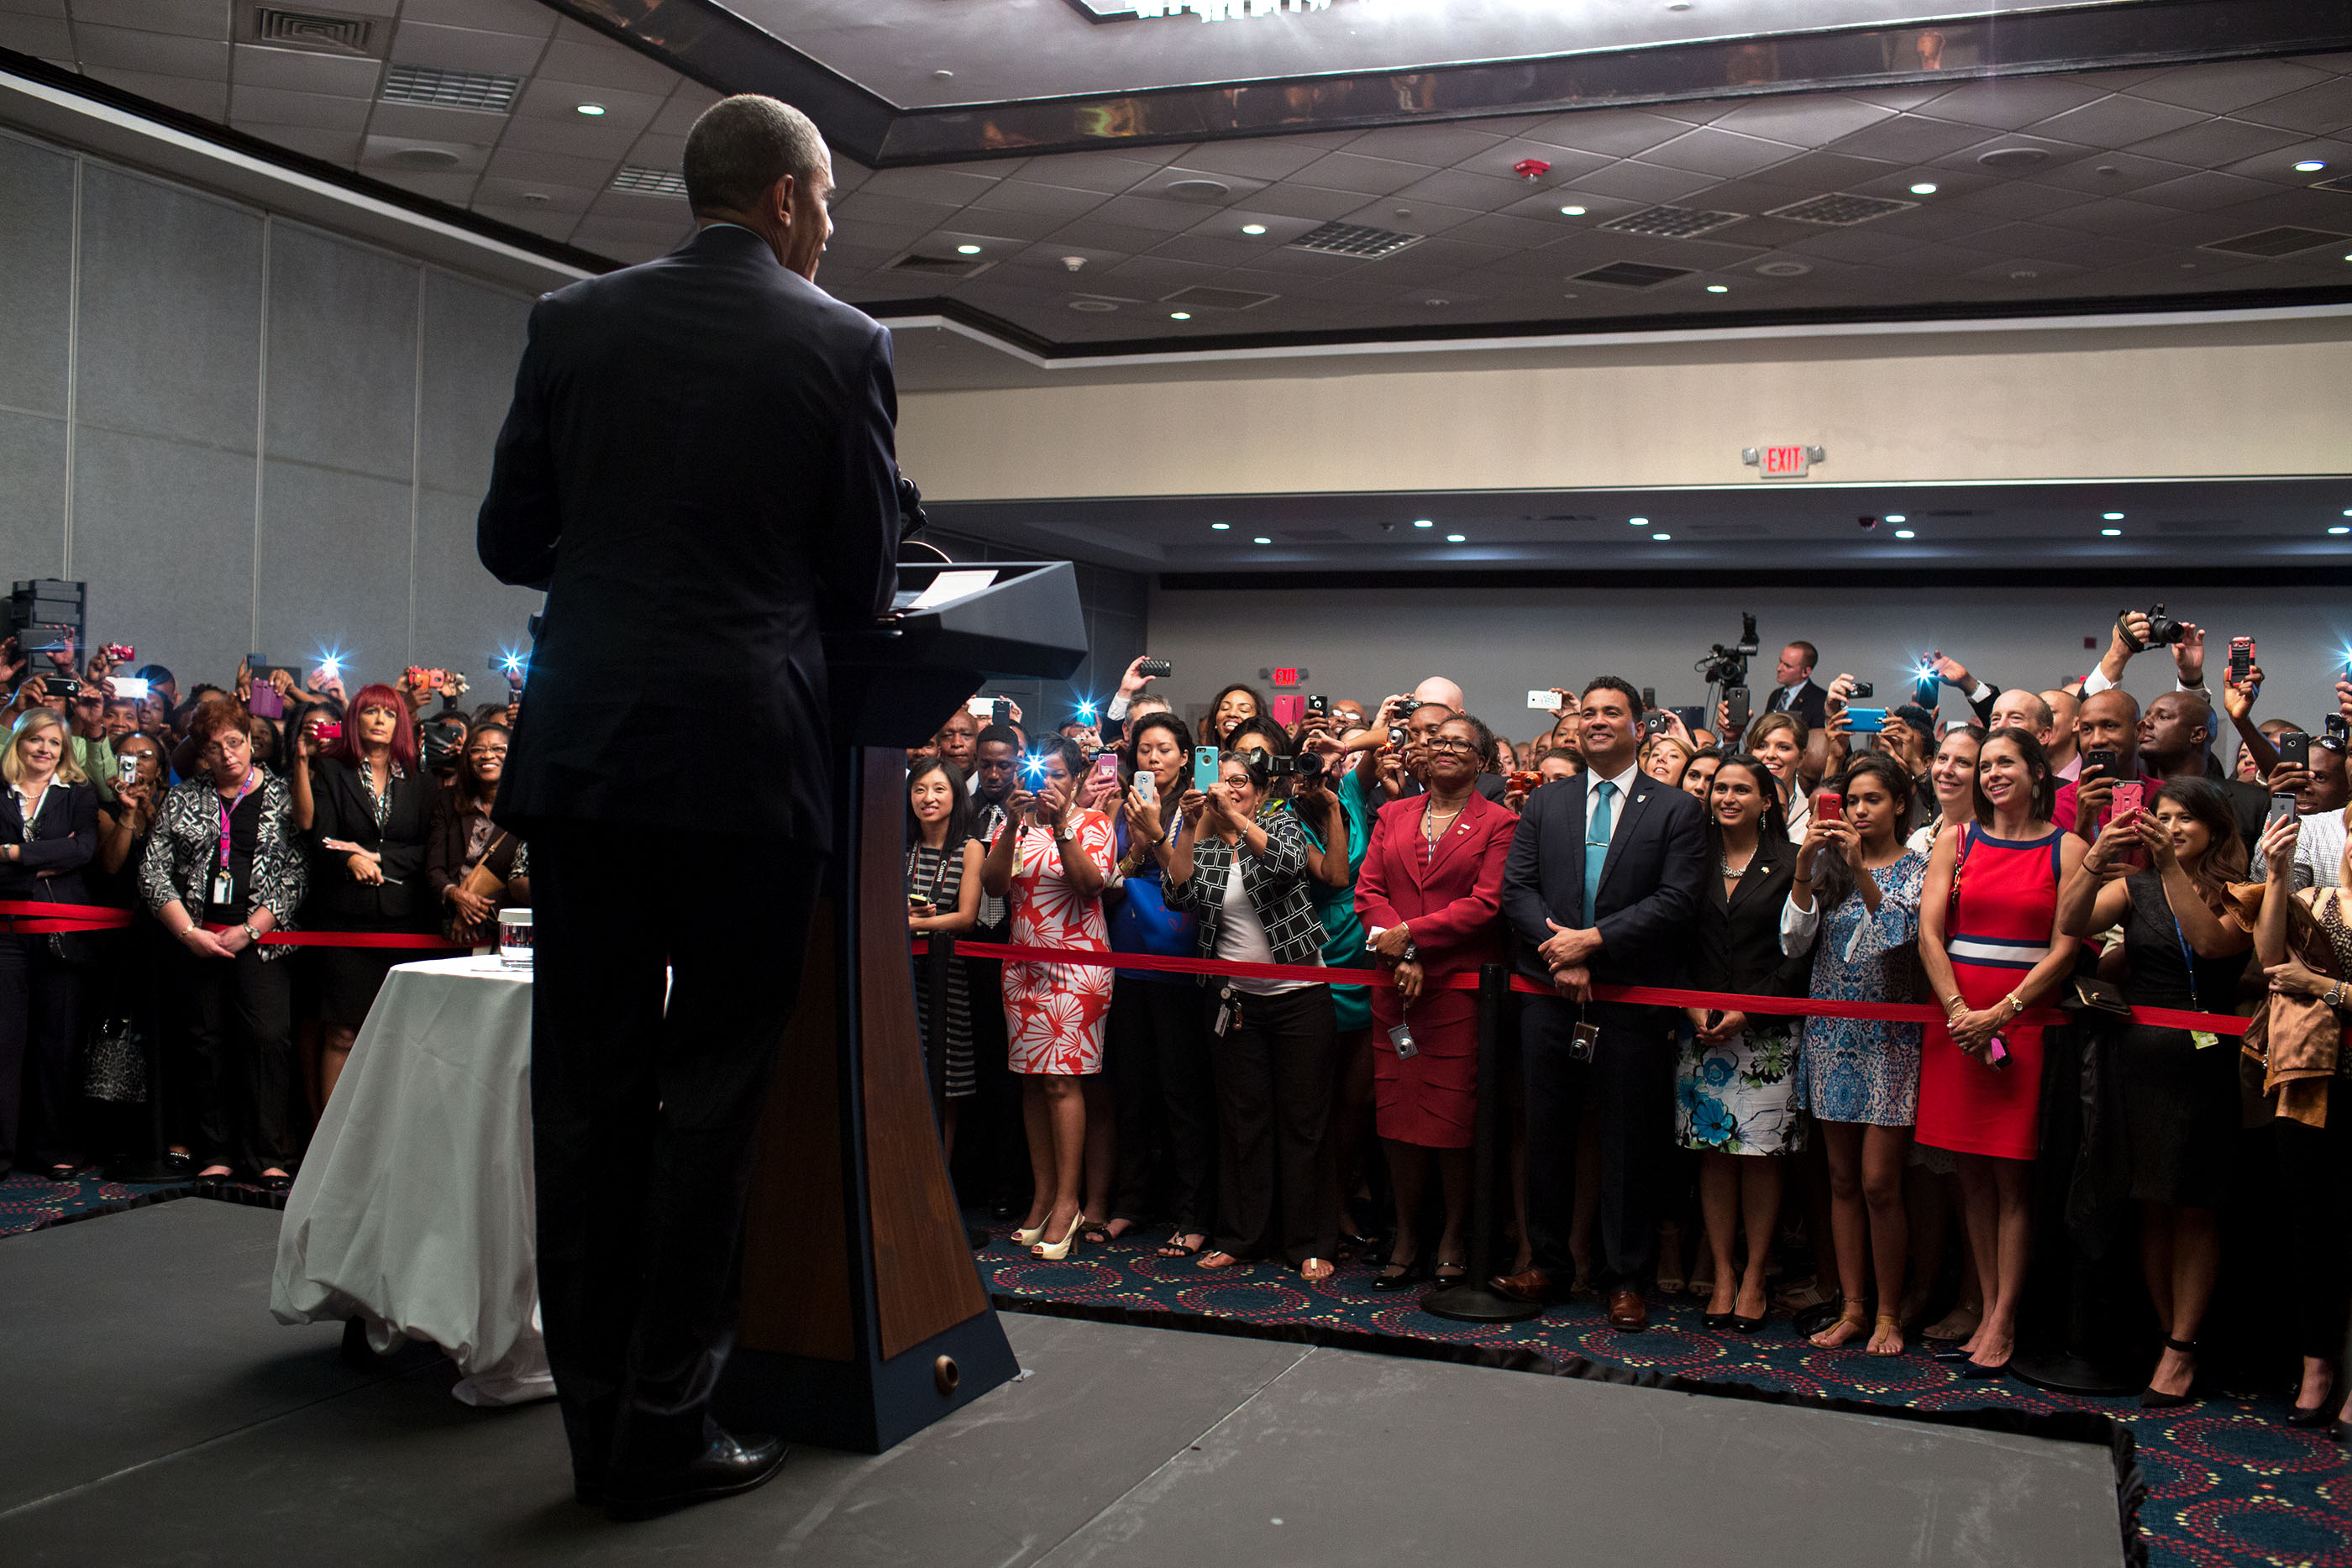 The President delivers remarks during a U.S. Embassy meet and greet at the Jamaica Pegasus Hotel. (Official White House Photo by Pete Souza)